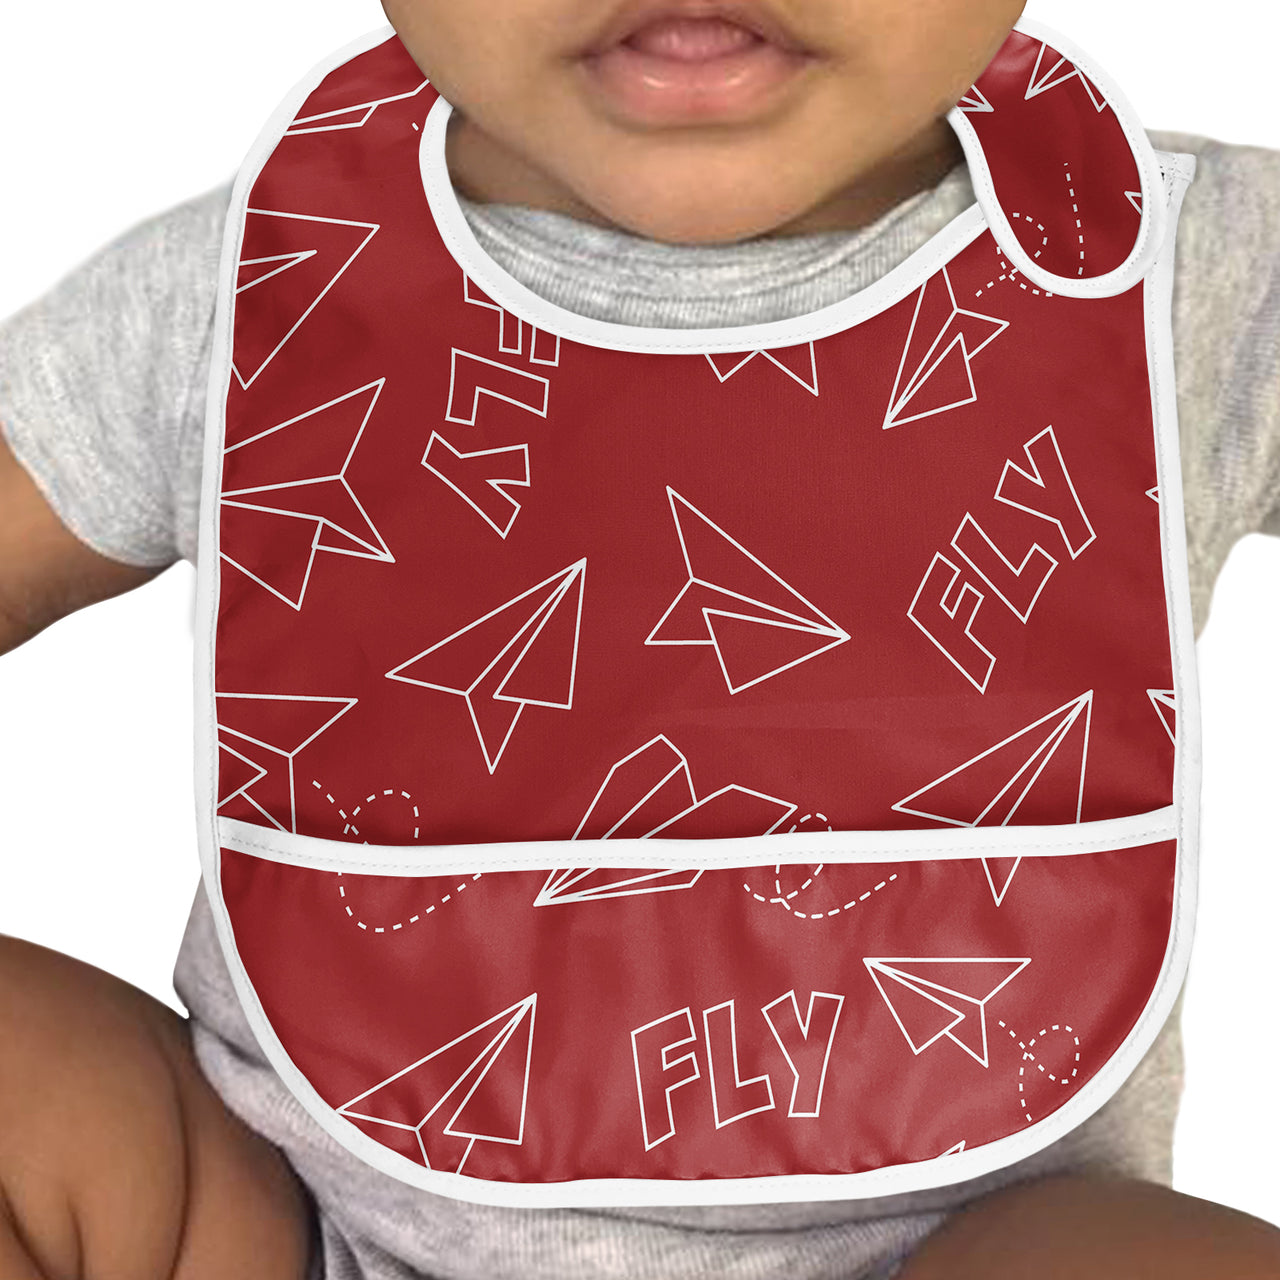 Paper Airplane & Fly (Red) Designed Baby Bib